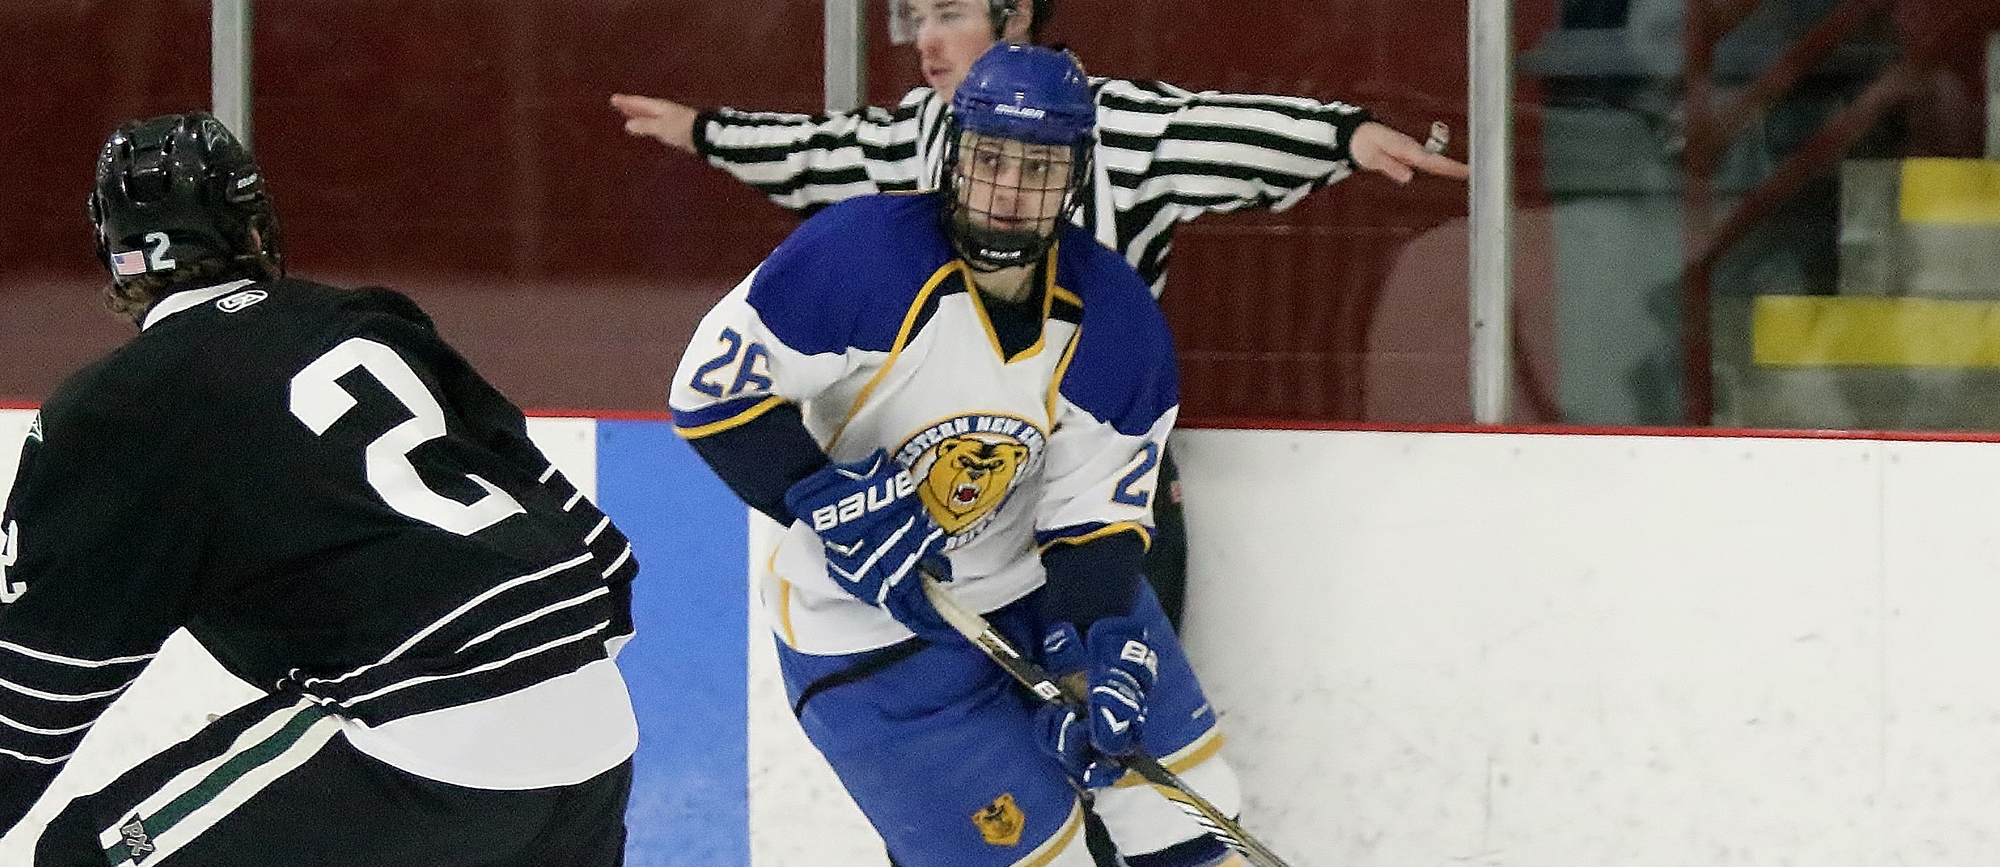 Junior David Kleyman scored his third goal of the season in Western New England's 3-2 loss to Wentworth on Saturday. (Photo by Larry Radner/Lifetouch)